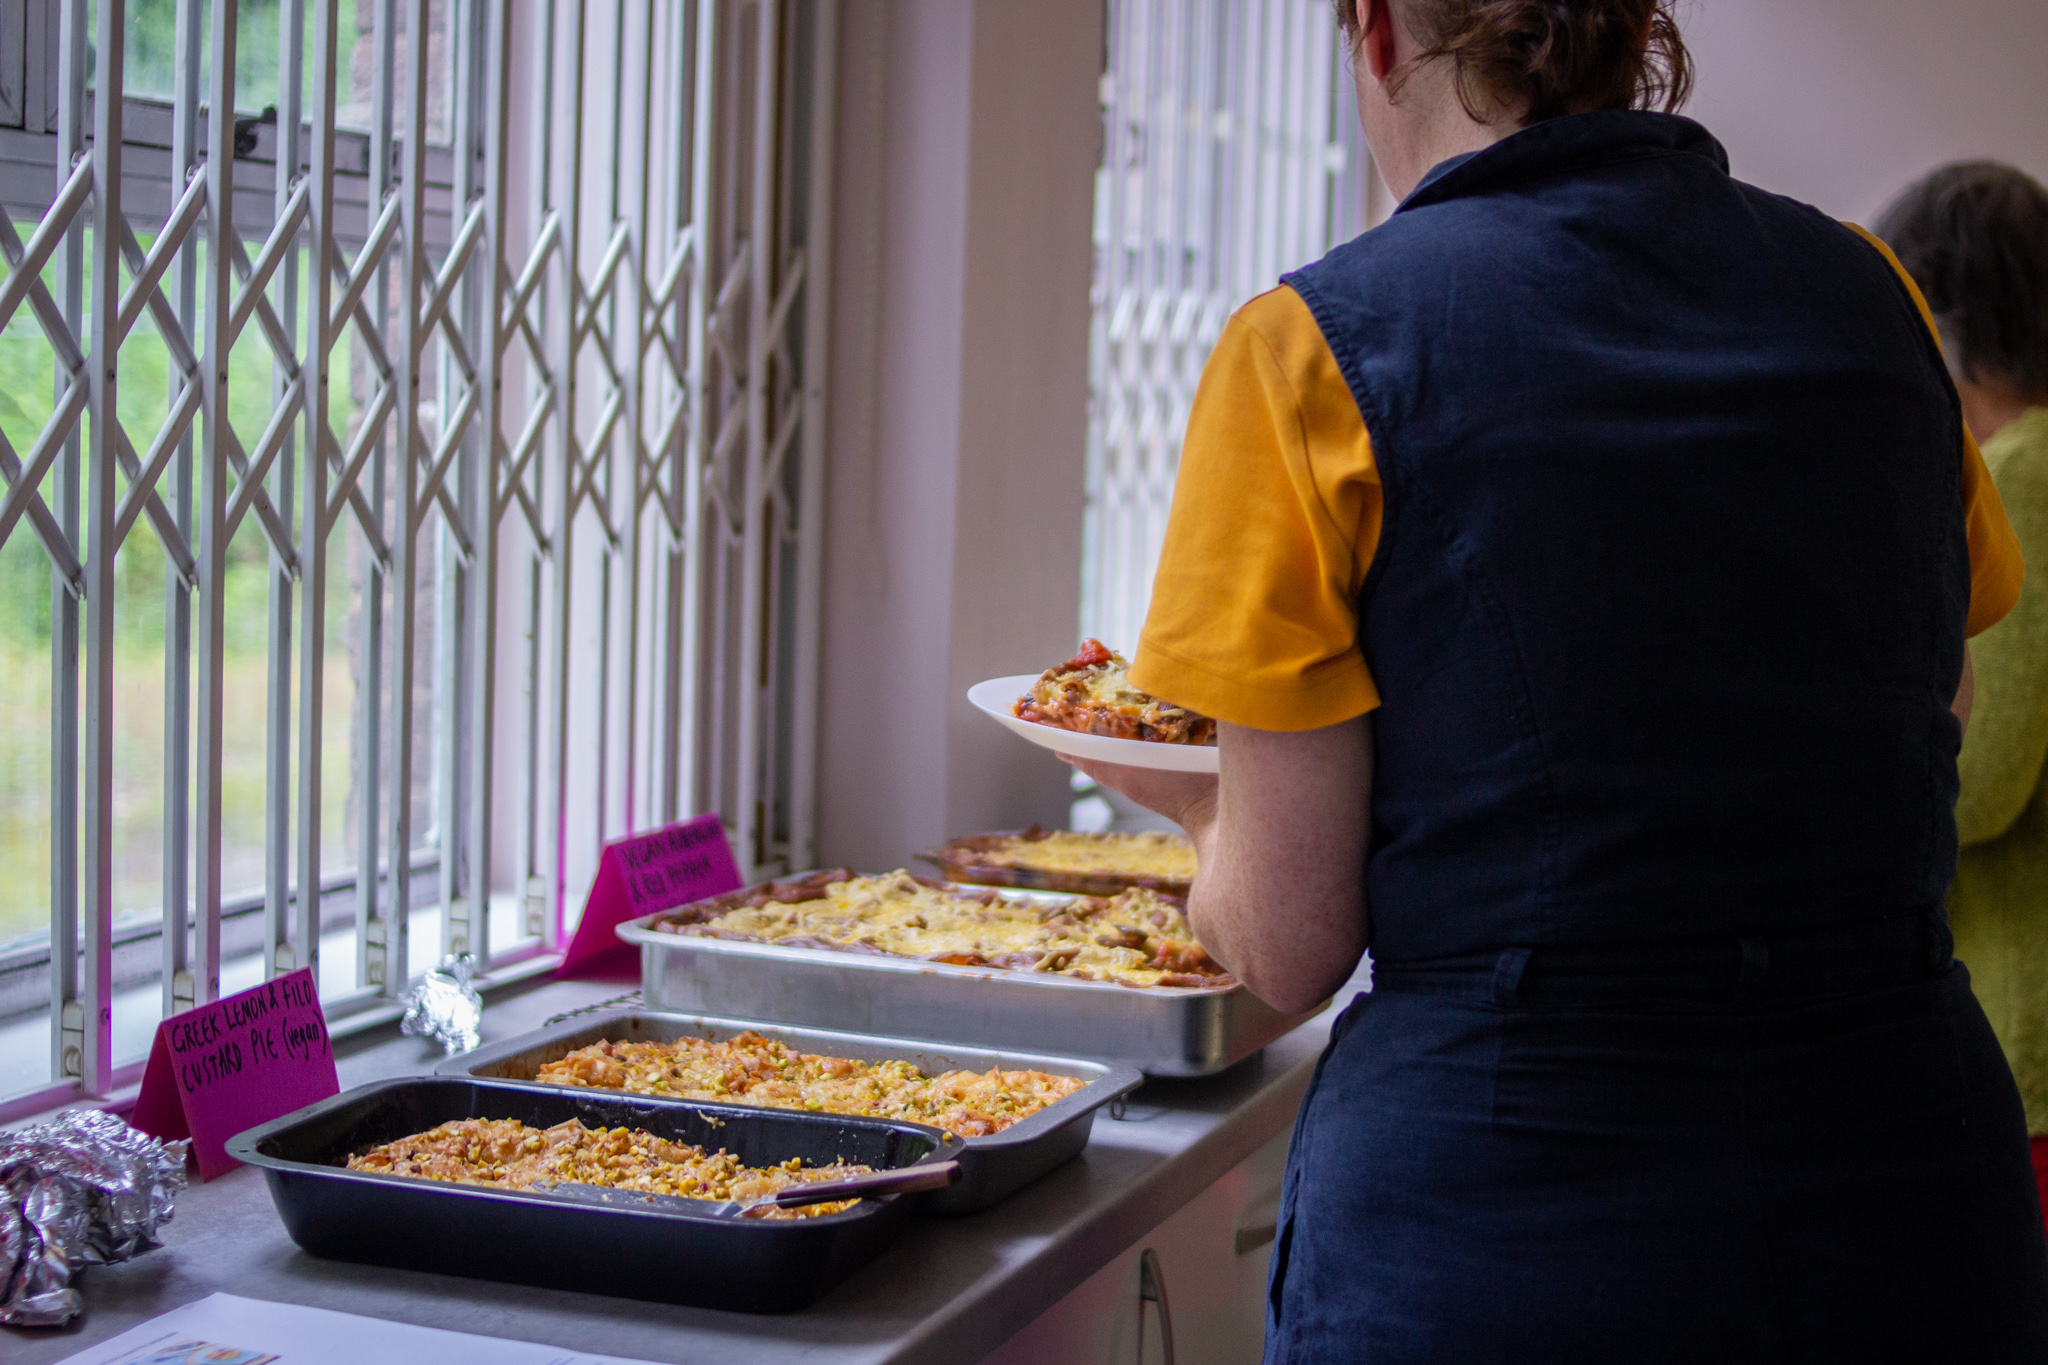 Woman with her back to us holds a plate of lasagne and stands in front of trays of food.